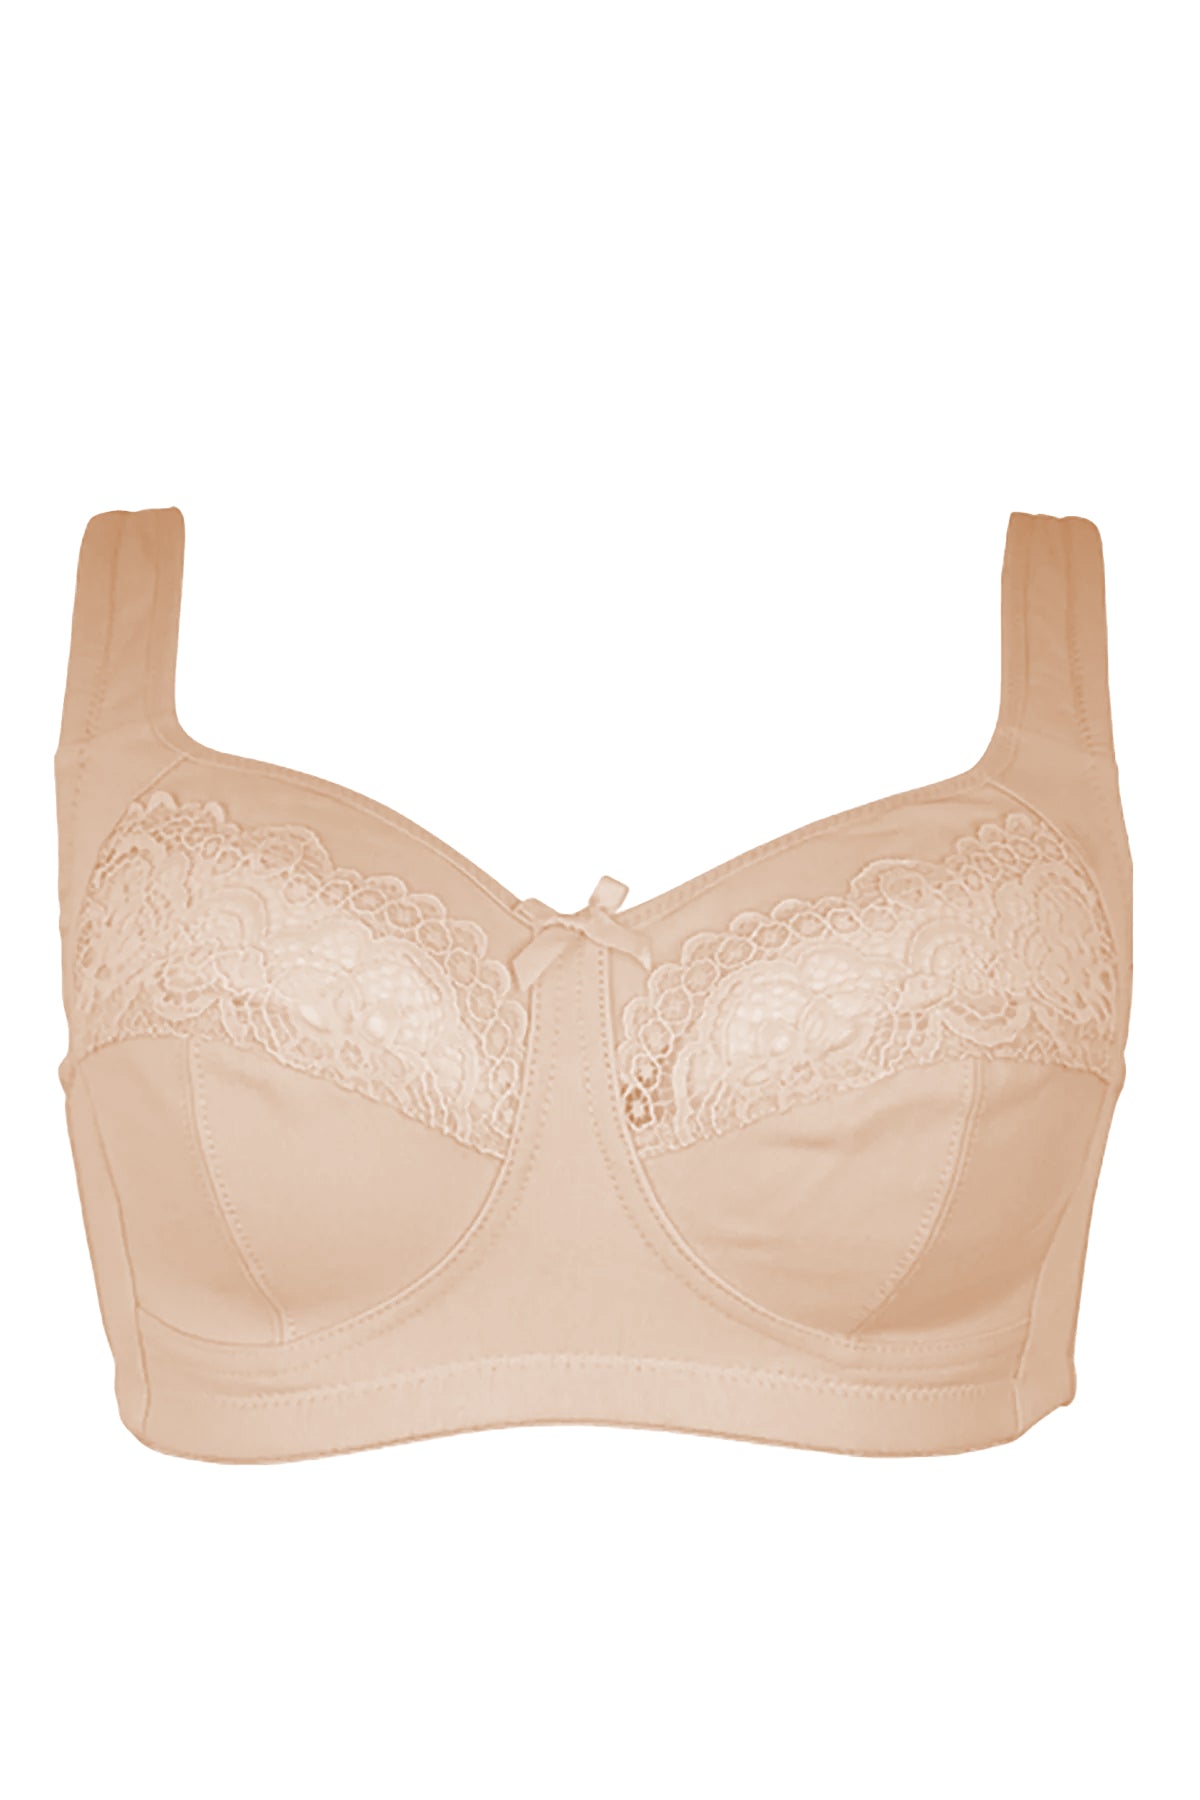 BLS - Carole Non Wired And Non Padded Cotton Bra - Skin – Makeup City  Pakistan